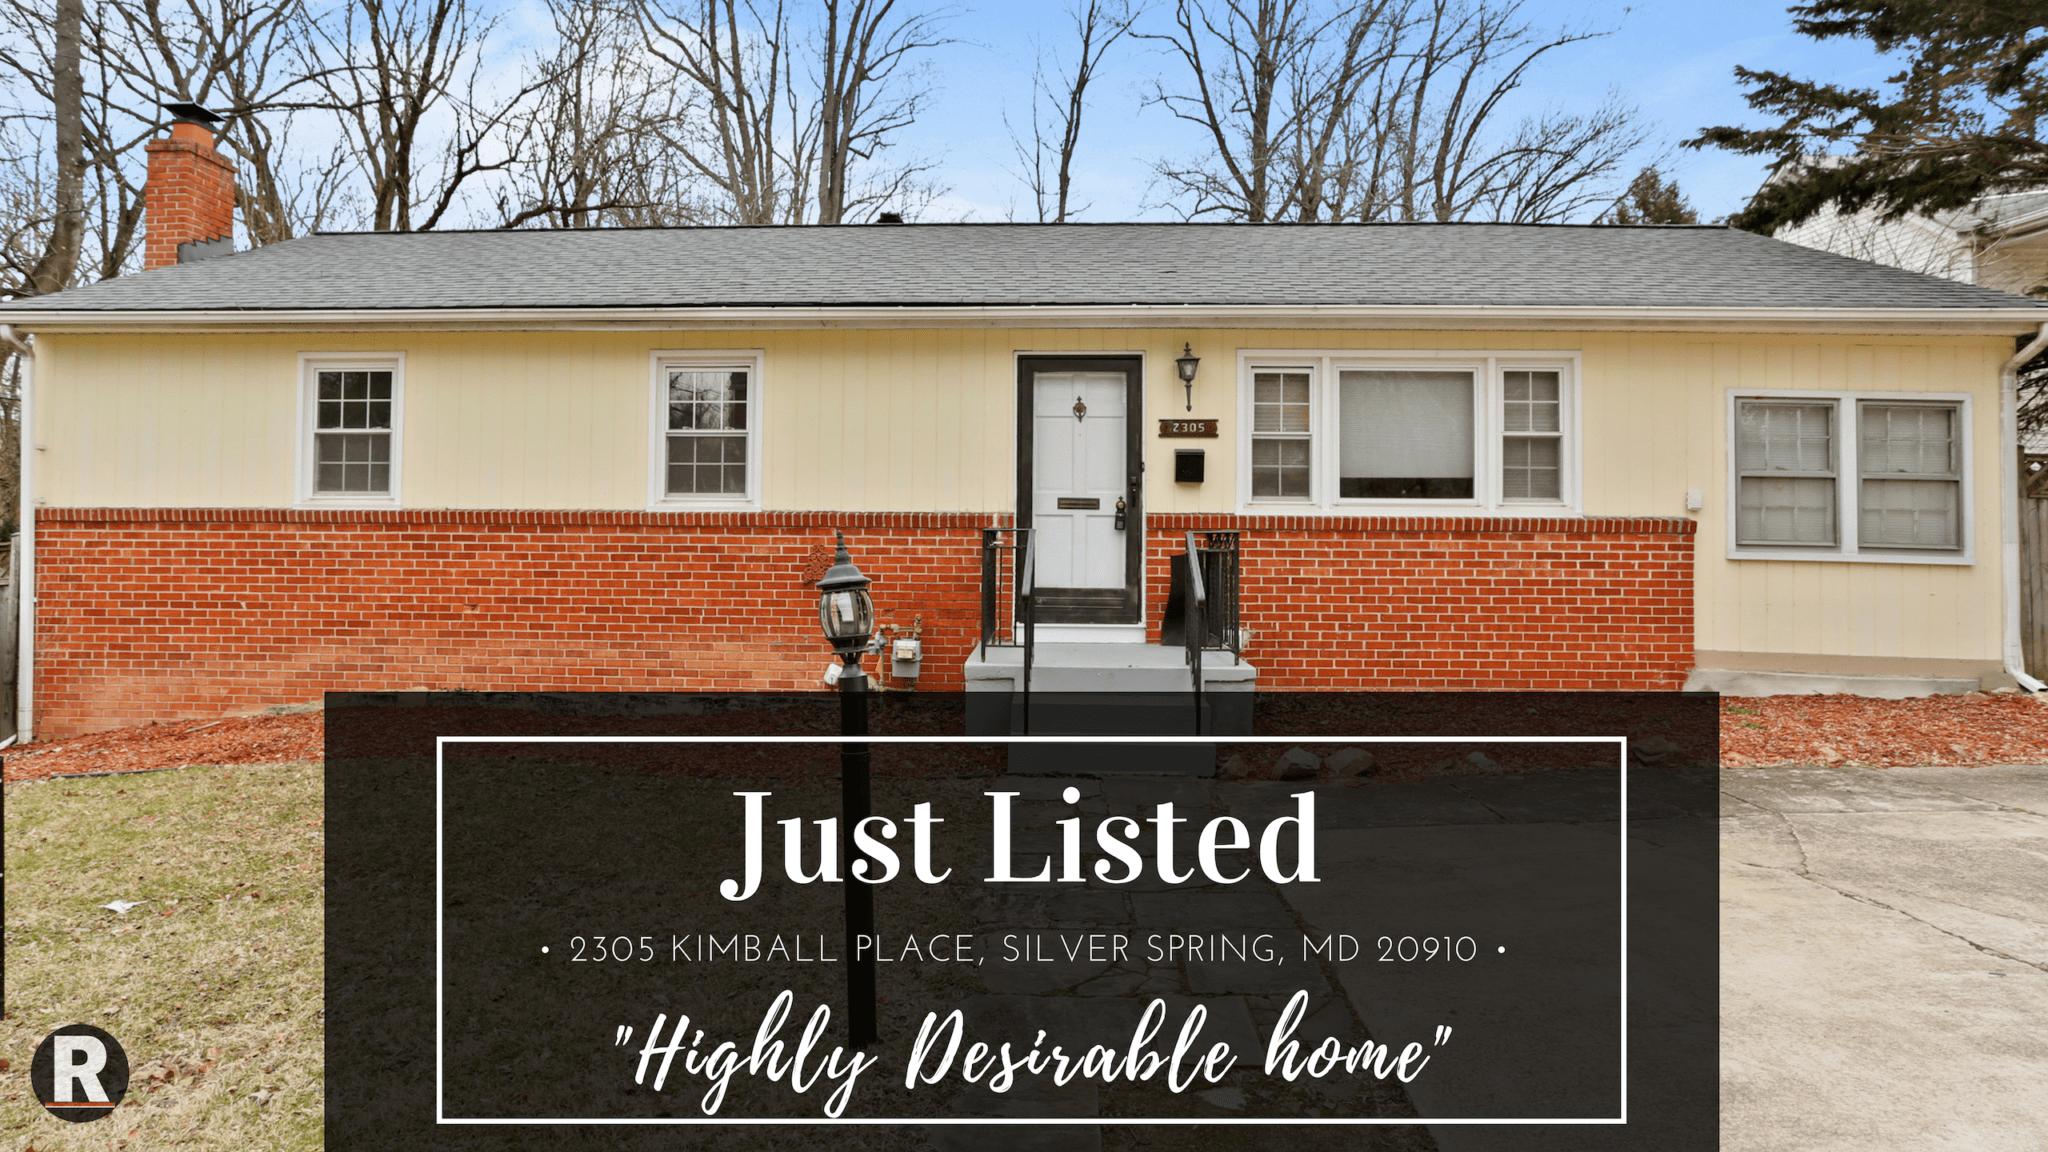 Just Listed! 2305 Kimball Place, Silver Spring, MD 20910